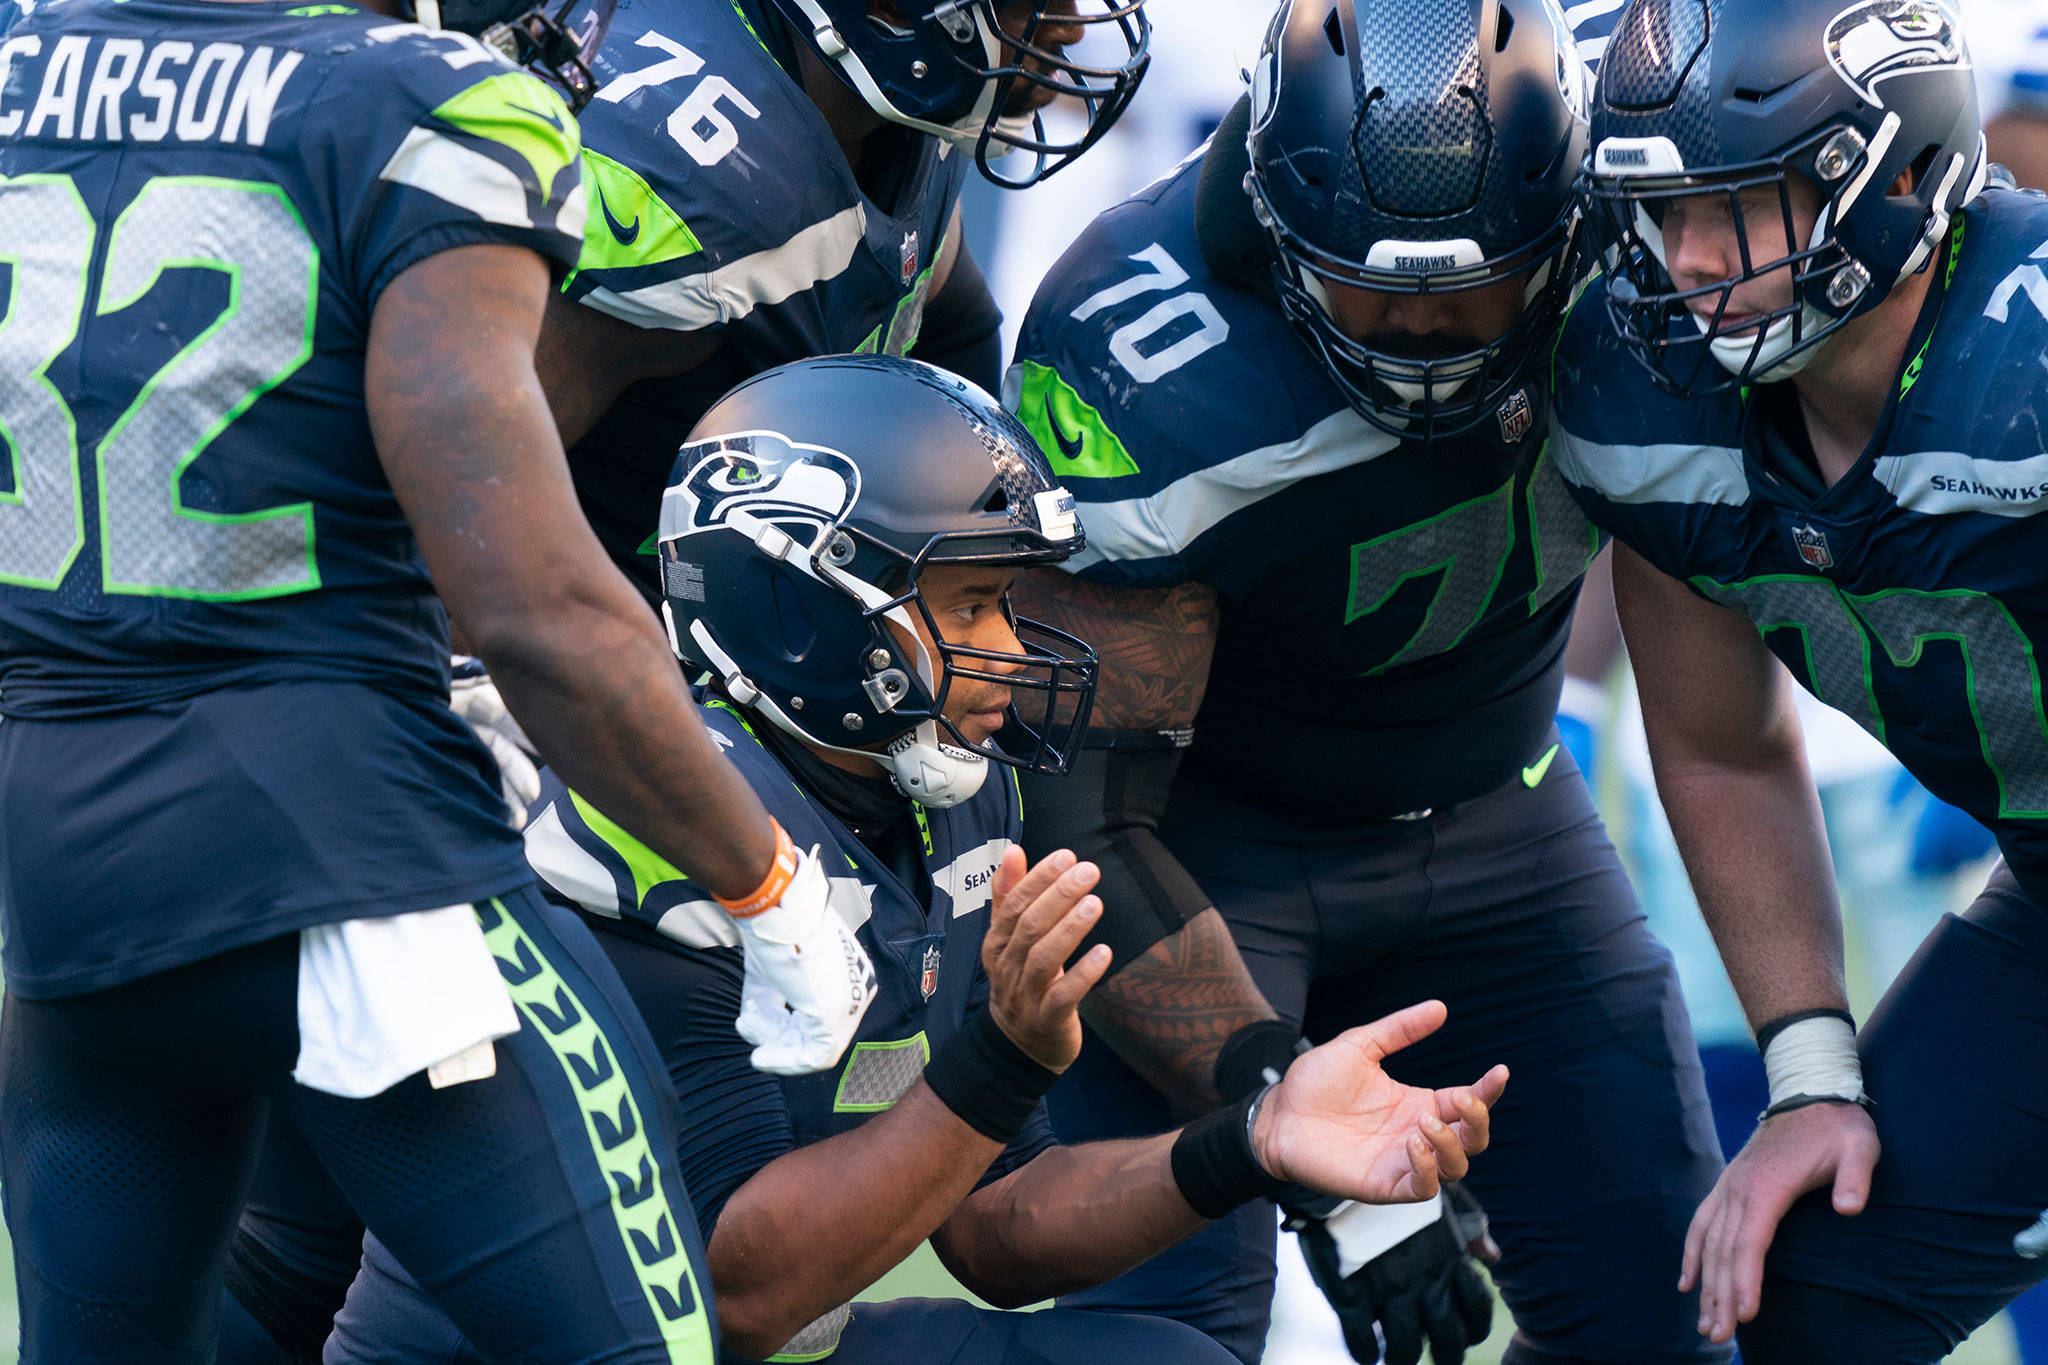 Seahawks quarterback Russell Wilson breaks the huddle during the second half of a game against the Cowboys on Sept. 27, 2020, in Seattle. (AP Photo/Stephen Brashear)